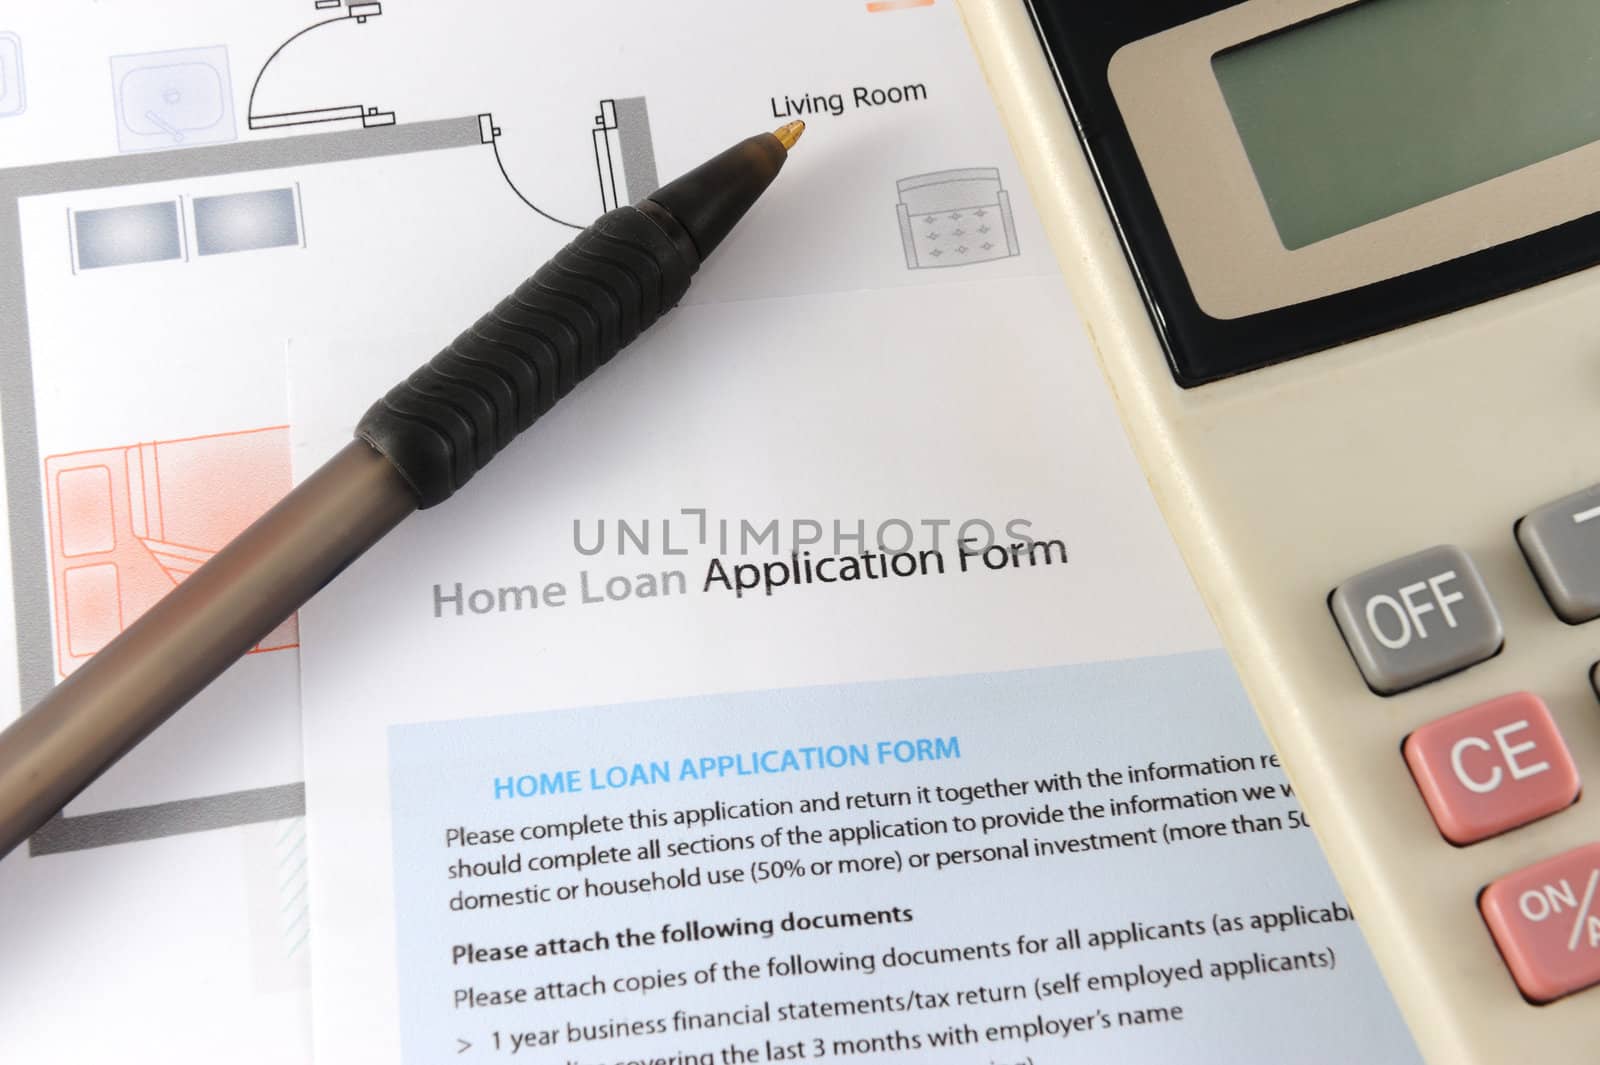 Home loan application form by raywoo